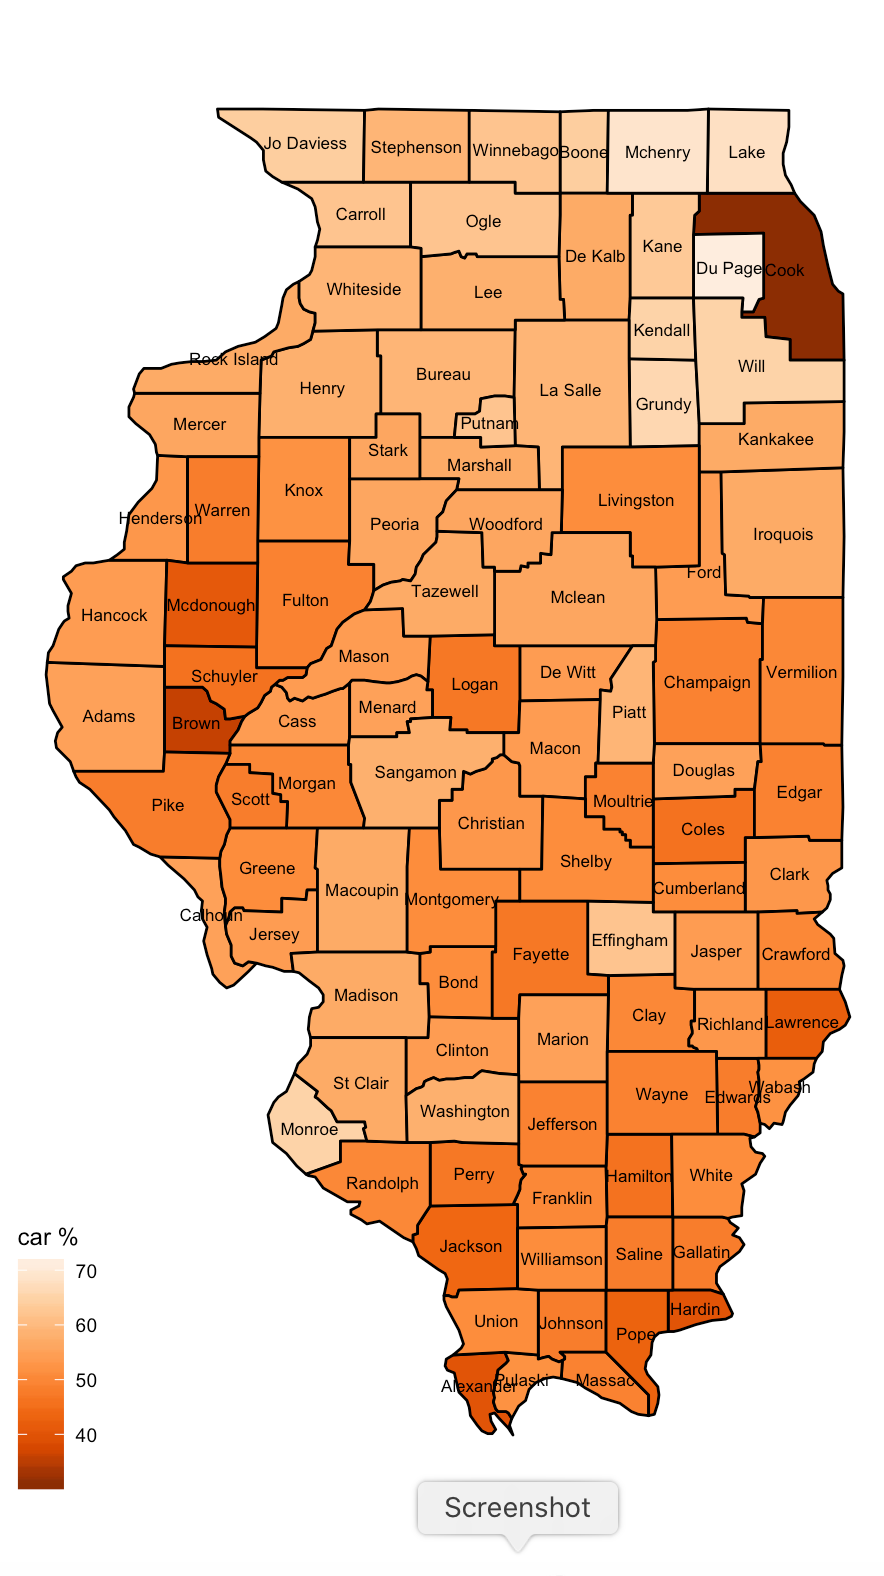 Choropleth of car ownership in
        Illinois counties